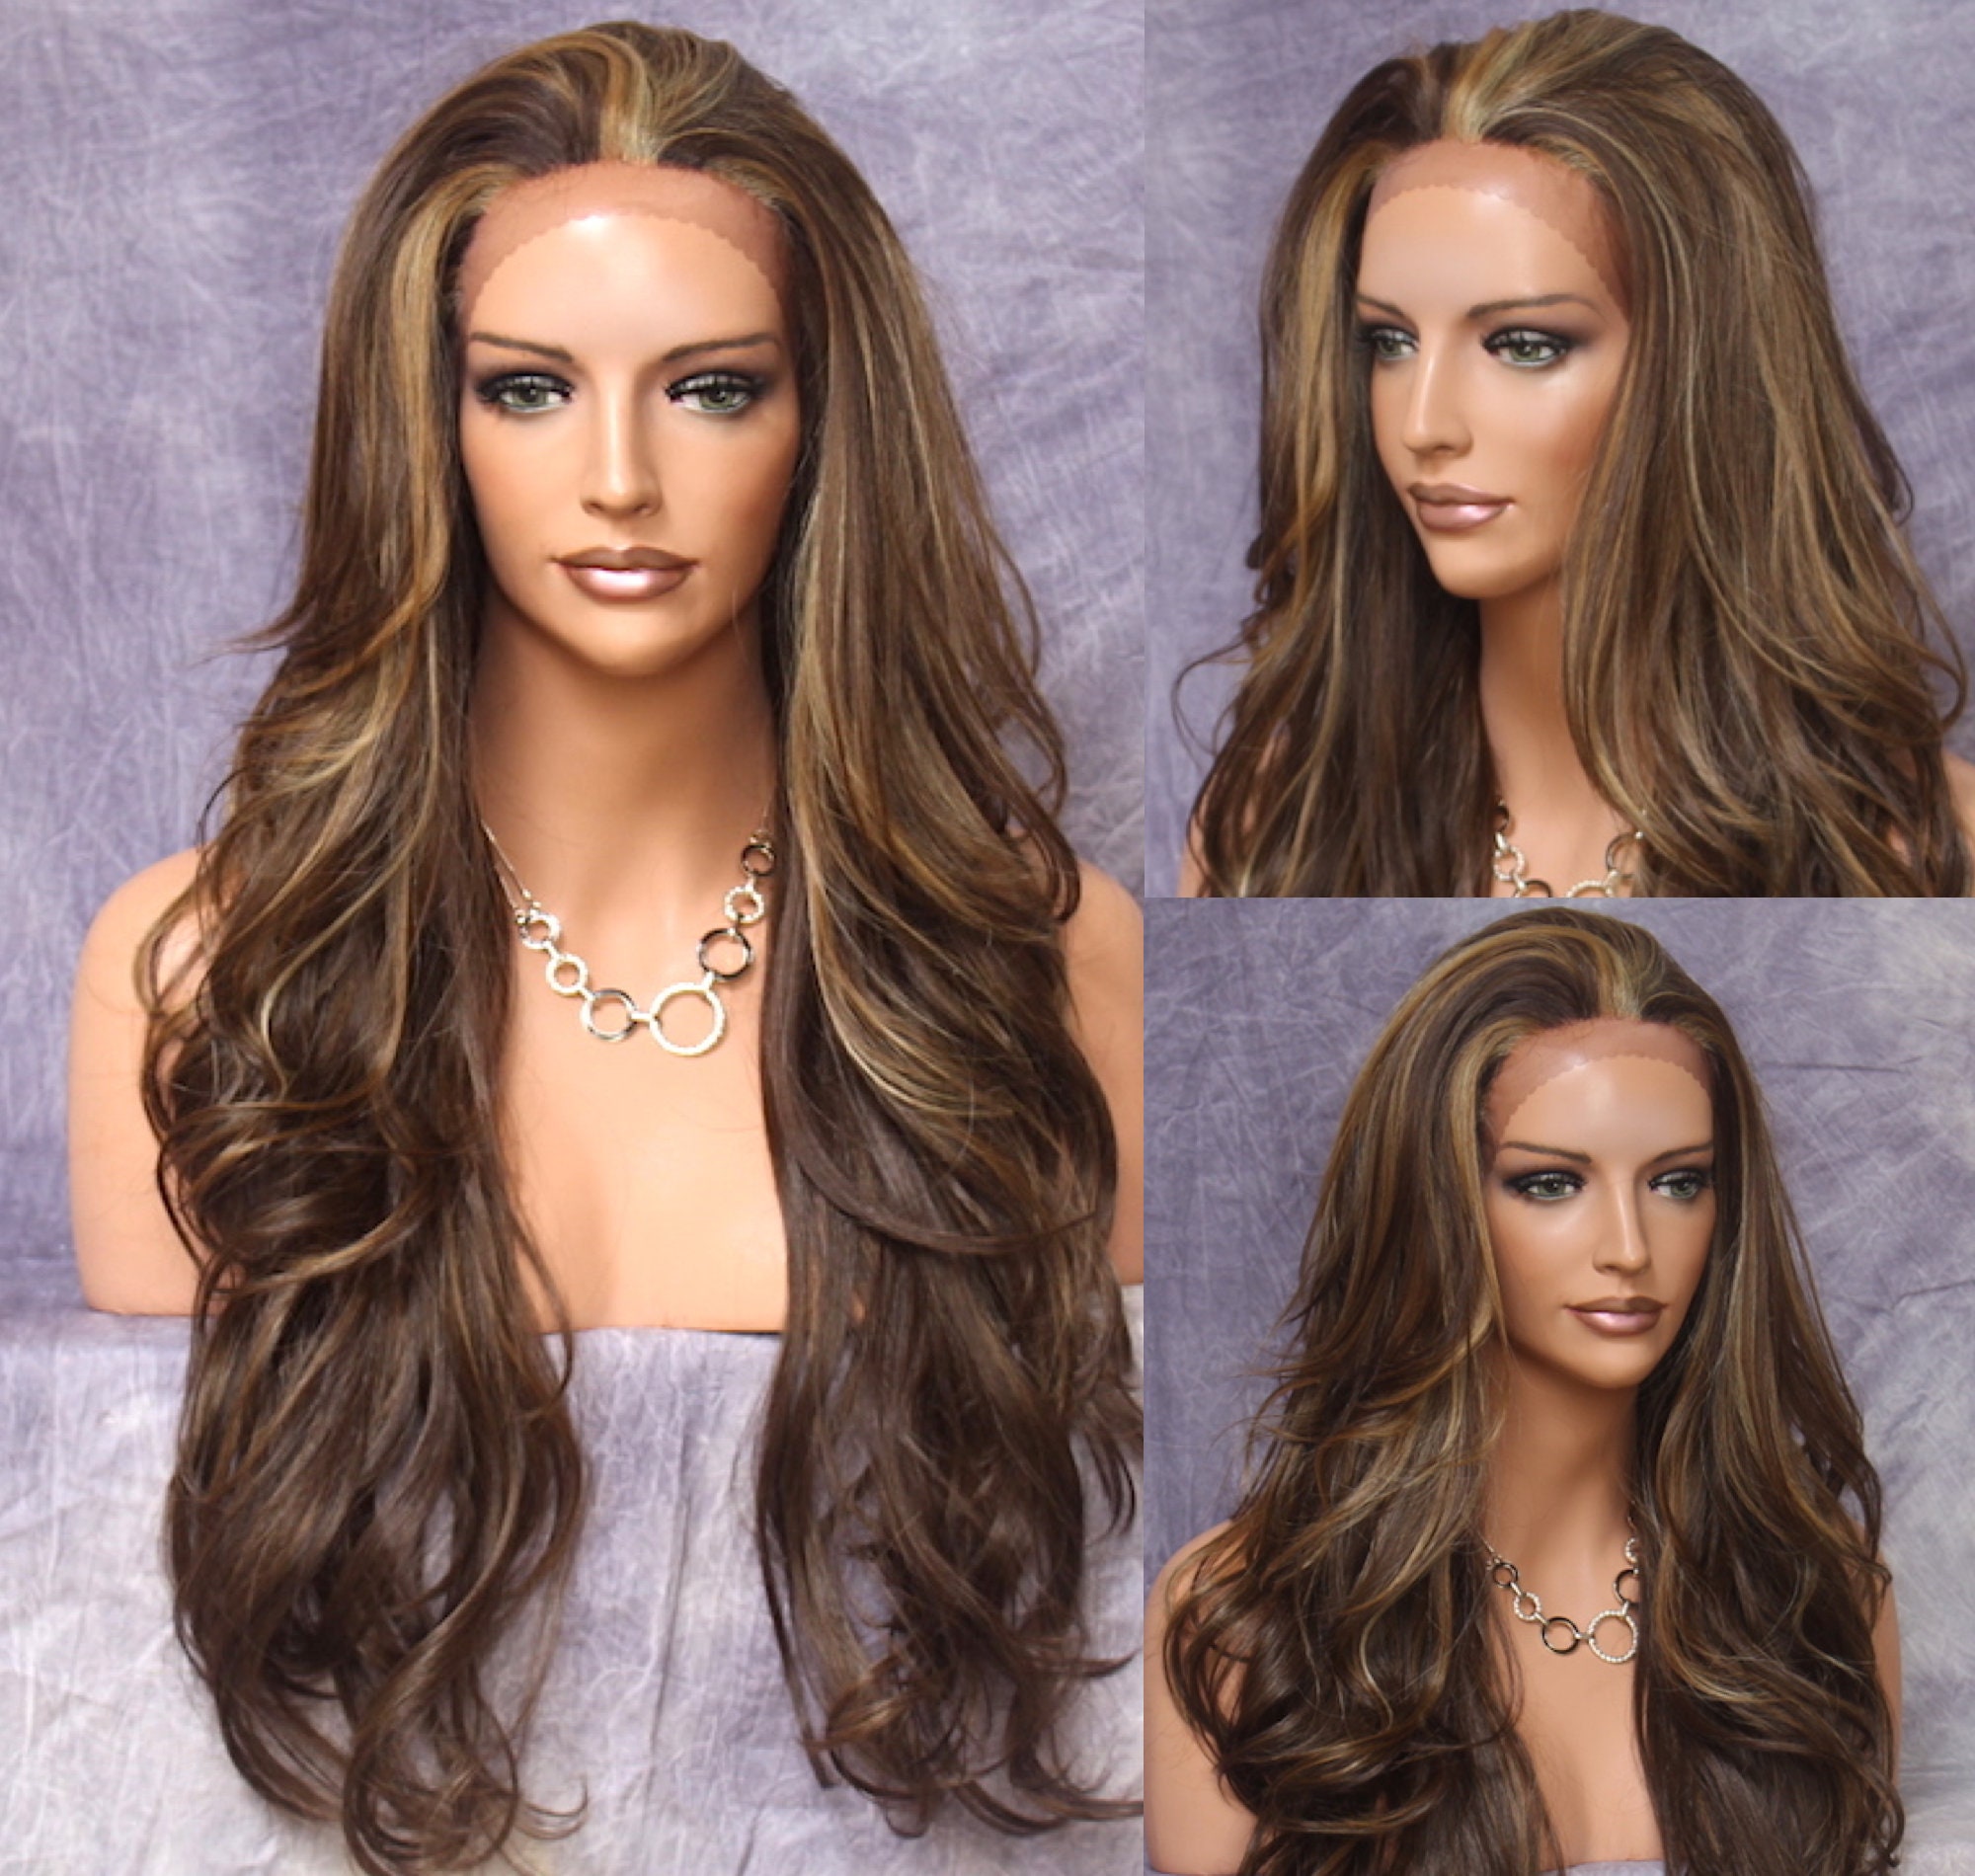 Human Hair Blend Lace Front Wig Layered & Wavy Beautiful Carmel Blonde Brown Mix Cancer/Alopecia/Cosplay